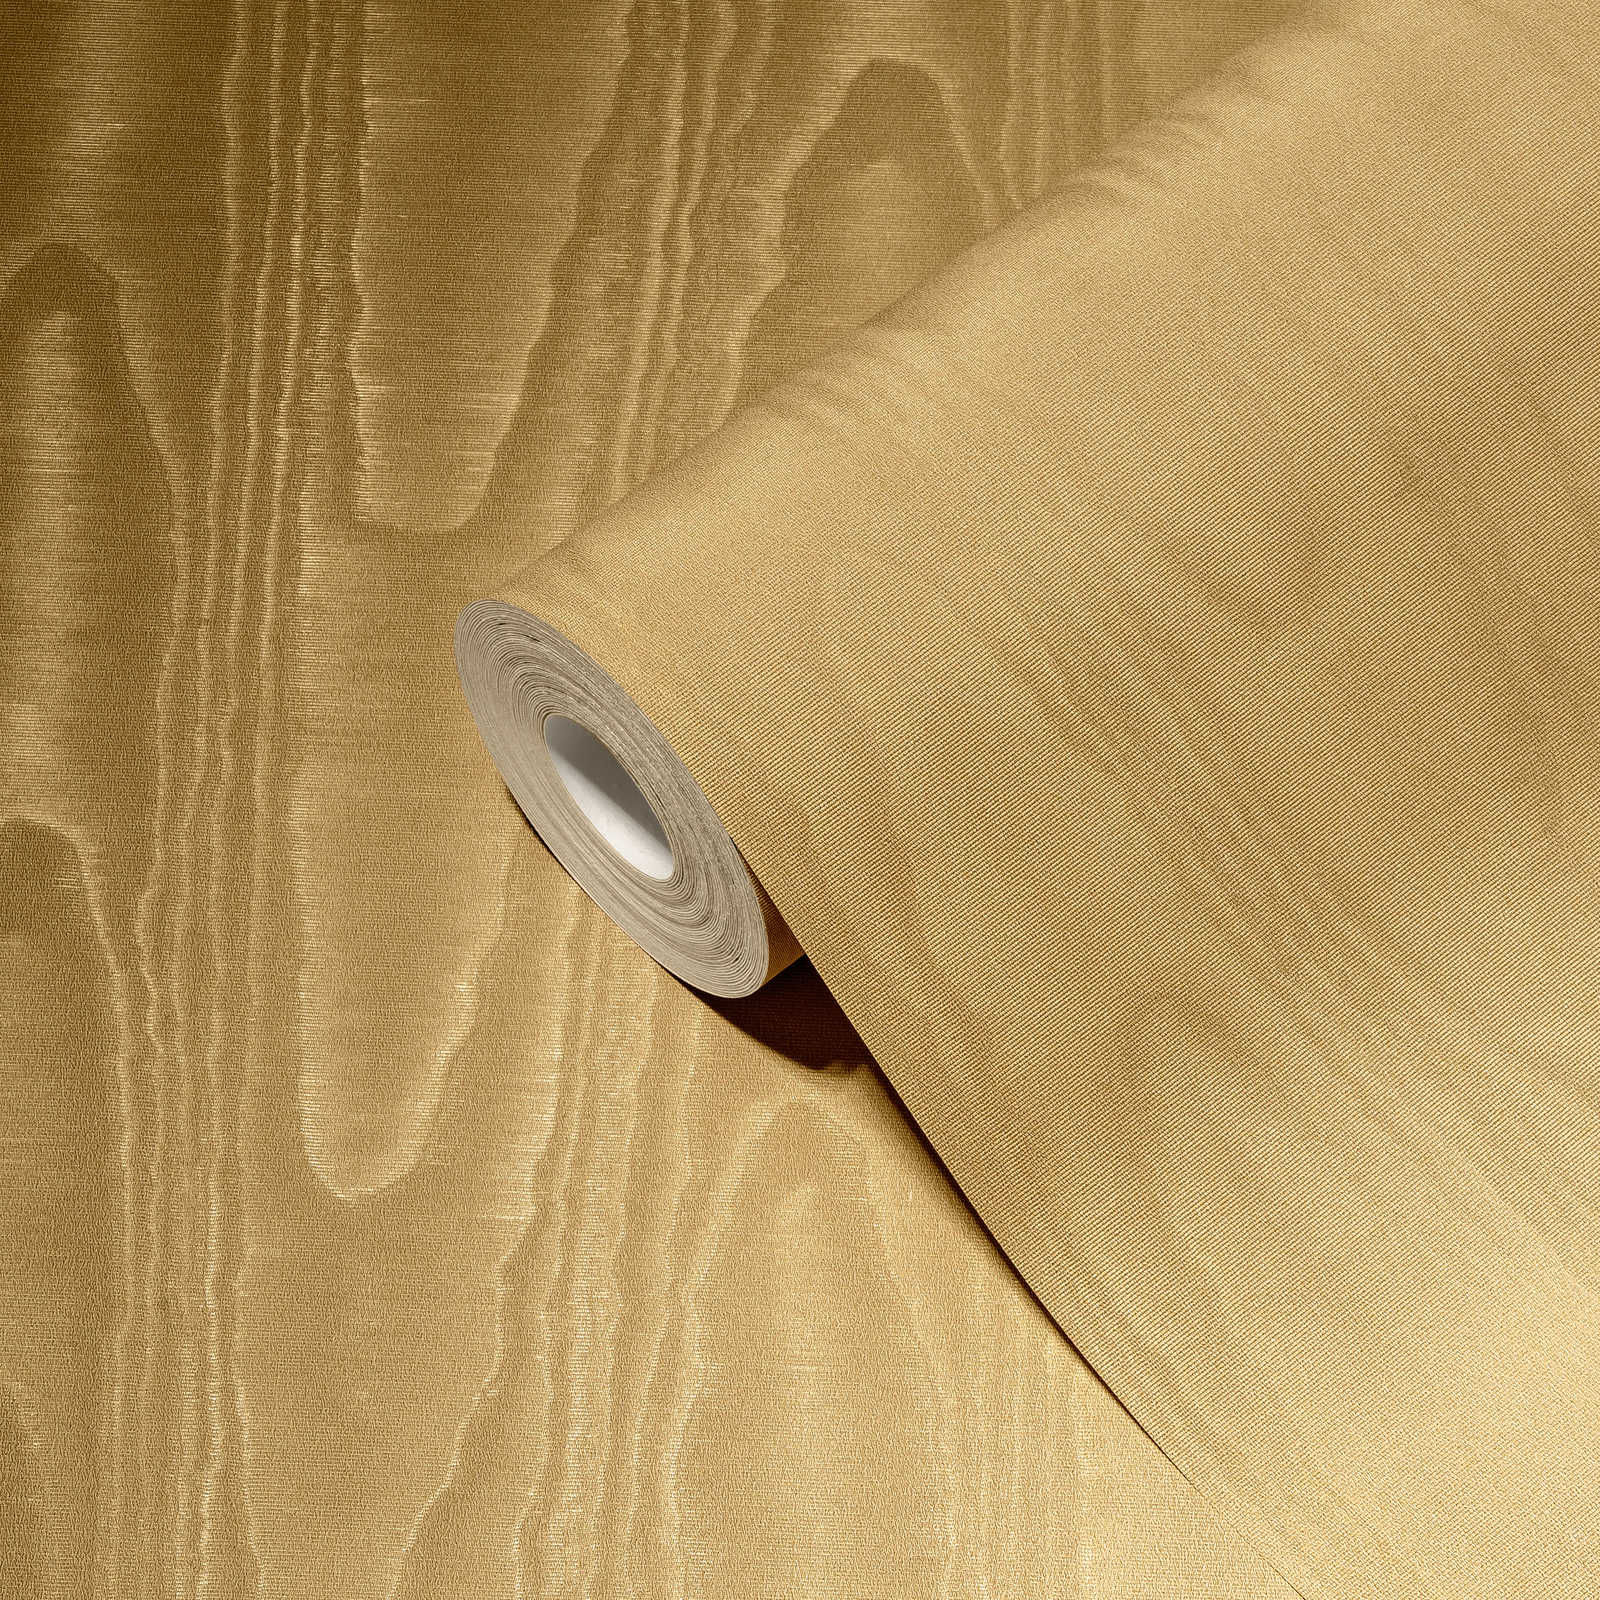             Textile-look wallpaper with silk moiré effect - brown, yellow
        